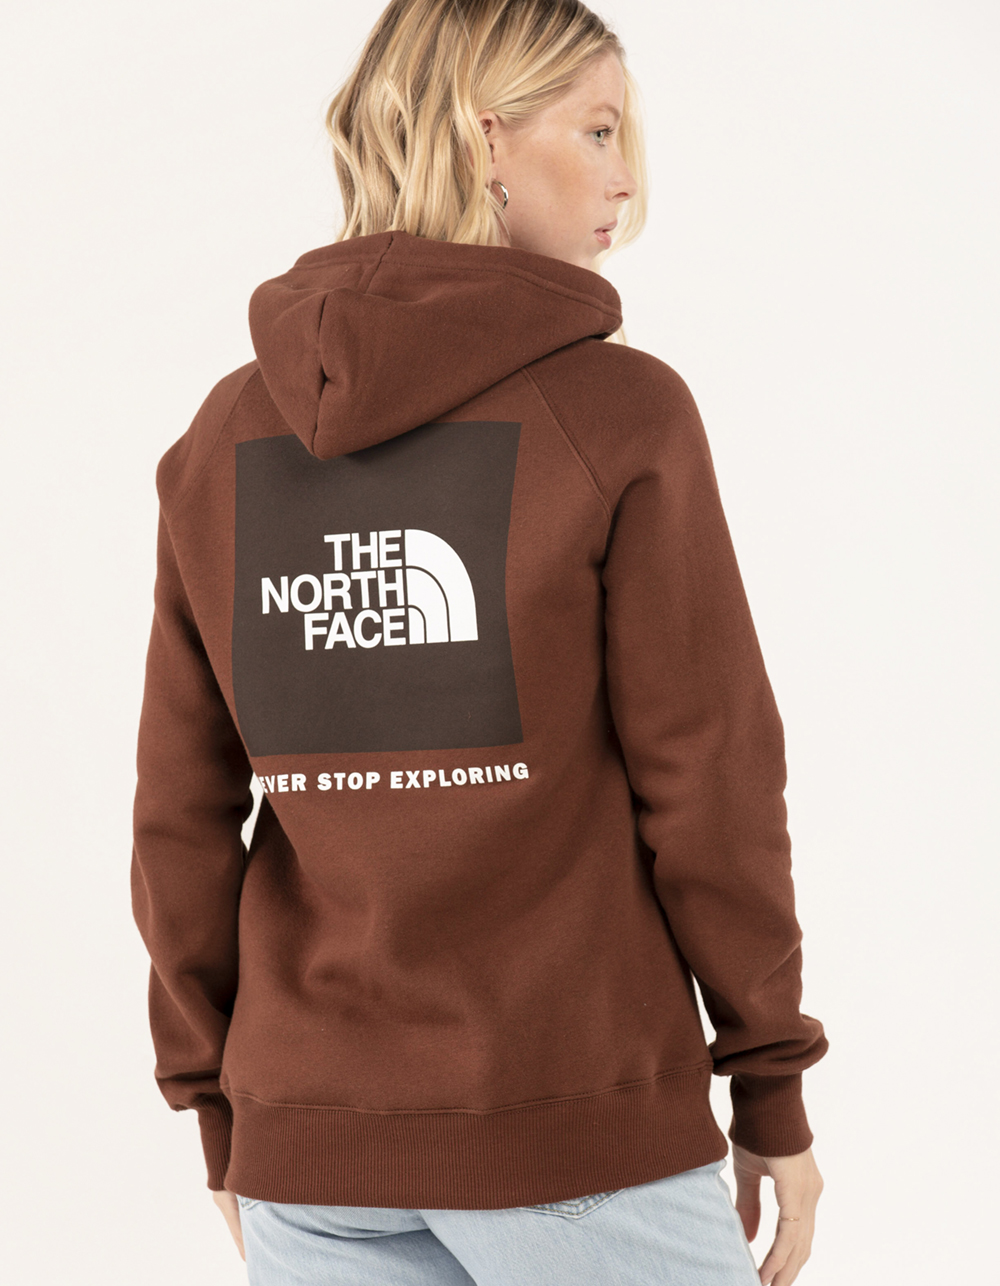 The North Face: Sweatshirts & Hoodies For Women